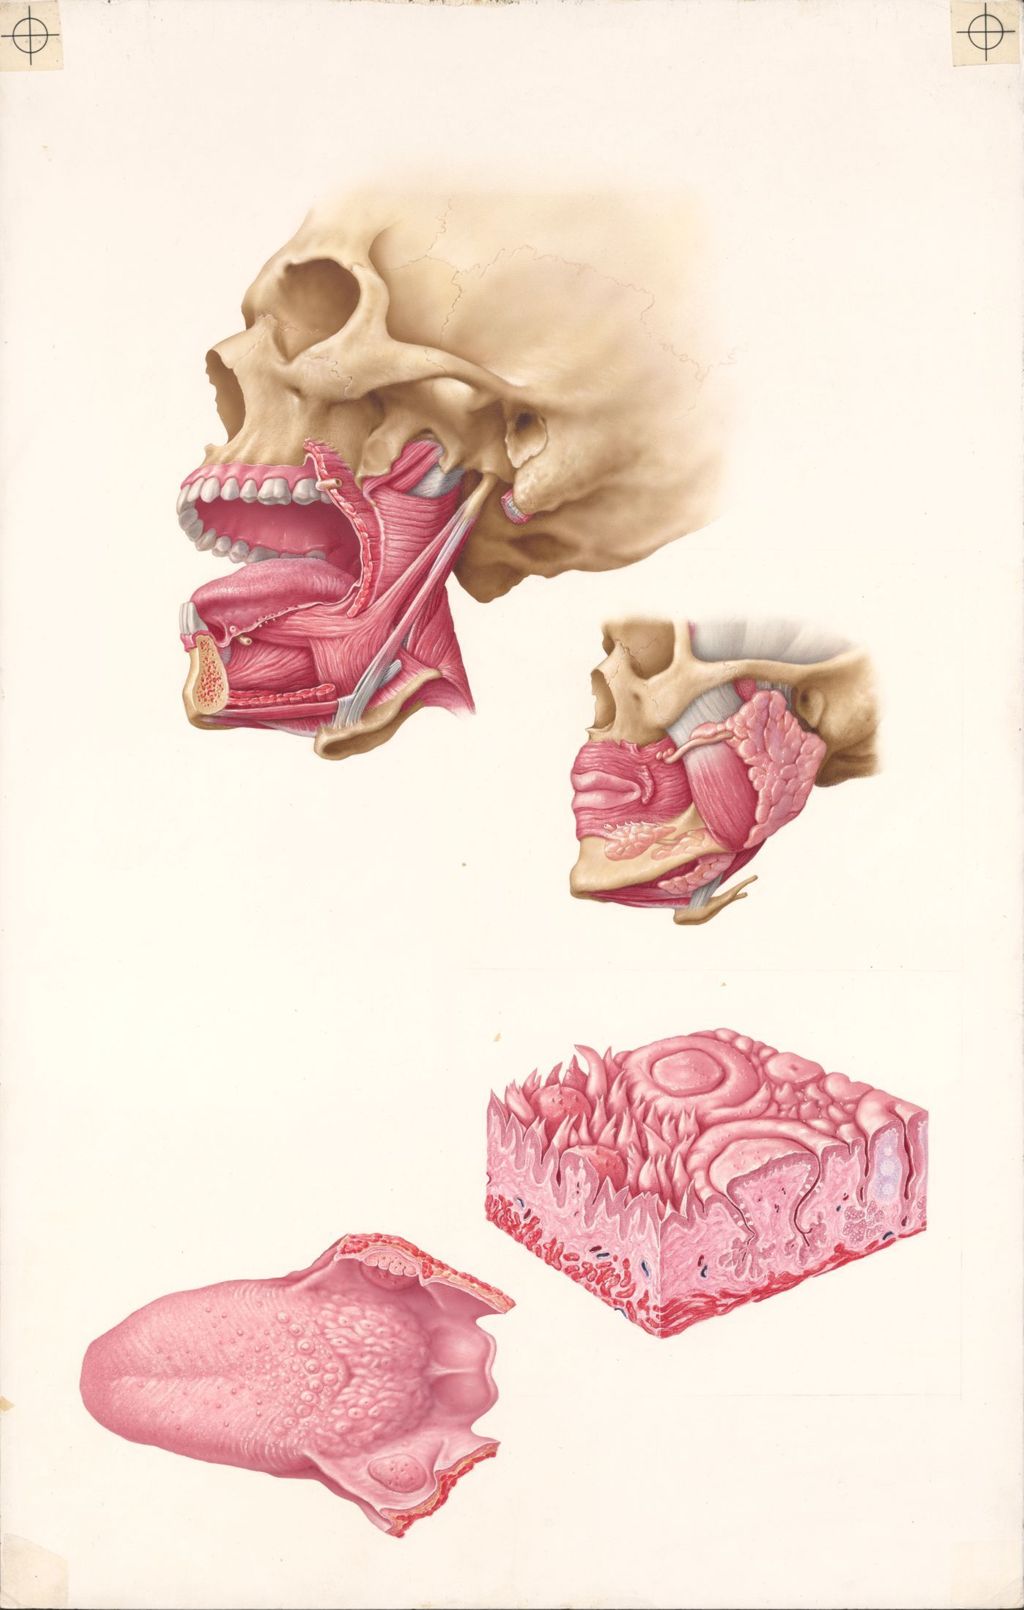 Doctor-Patient Explanatory Atlas of Anatomy, the Normal Anatomy of the Mouth, Plate II The Tongue and Salivary Glands Exposure of the Tongue Muscles